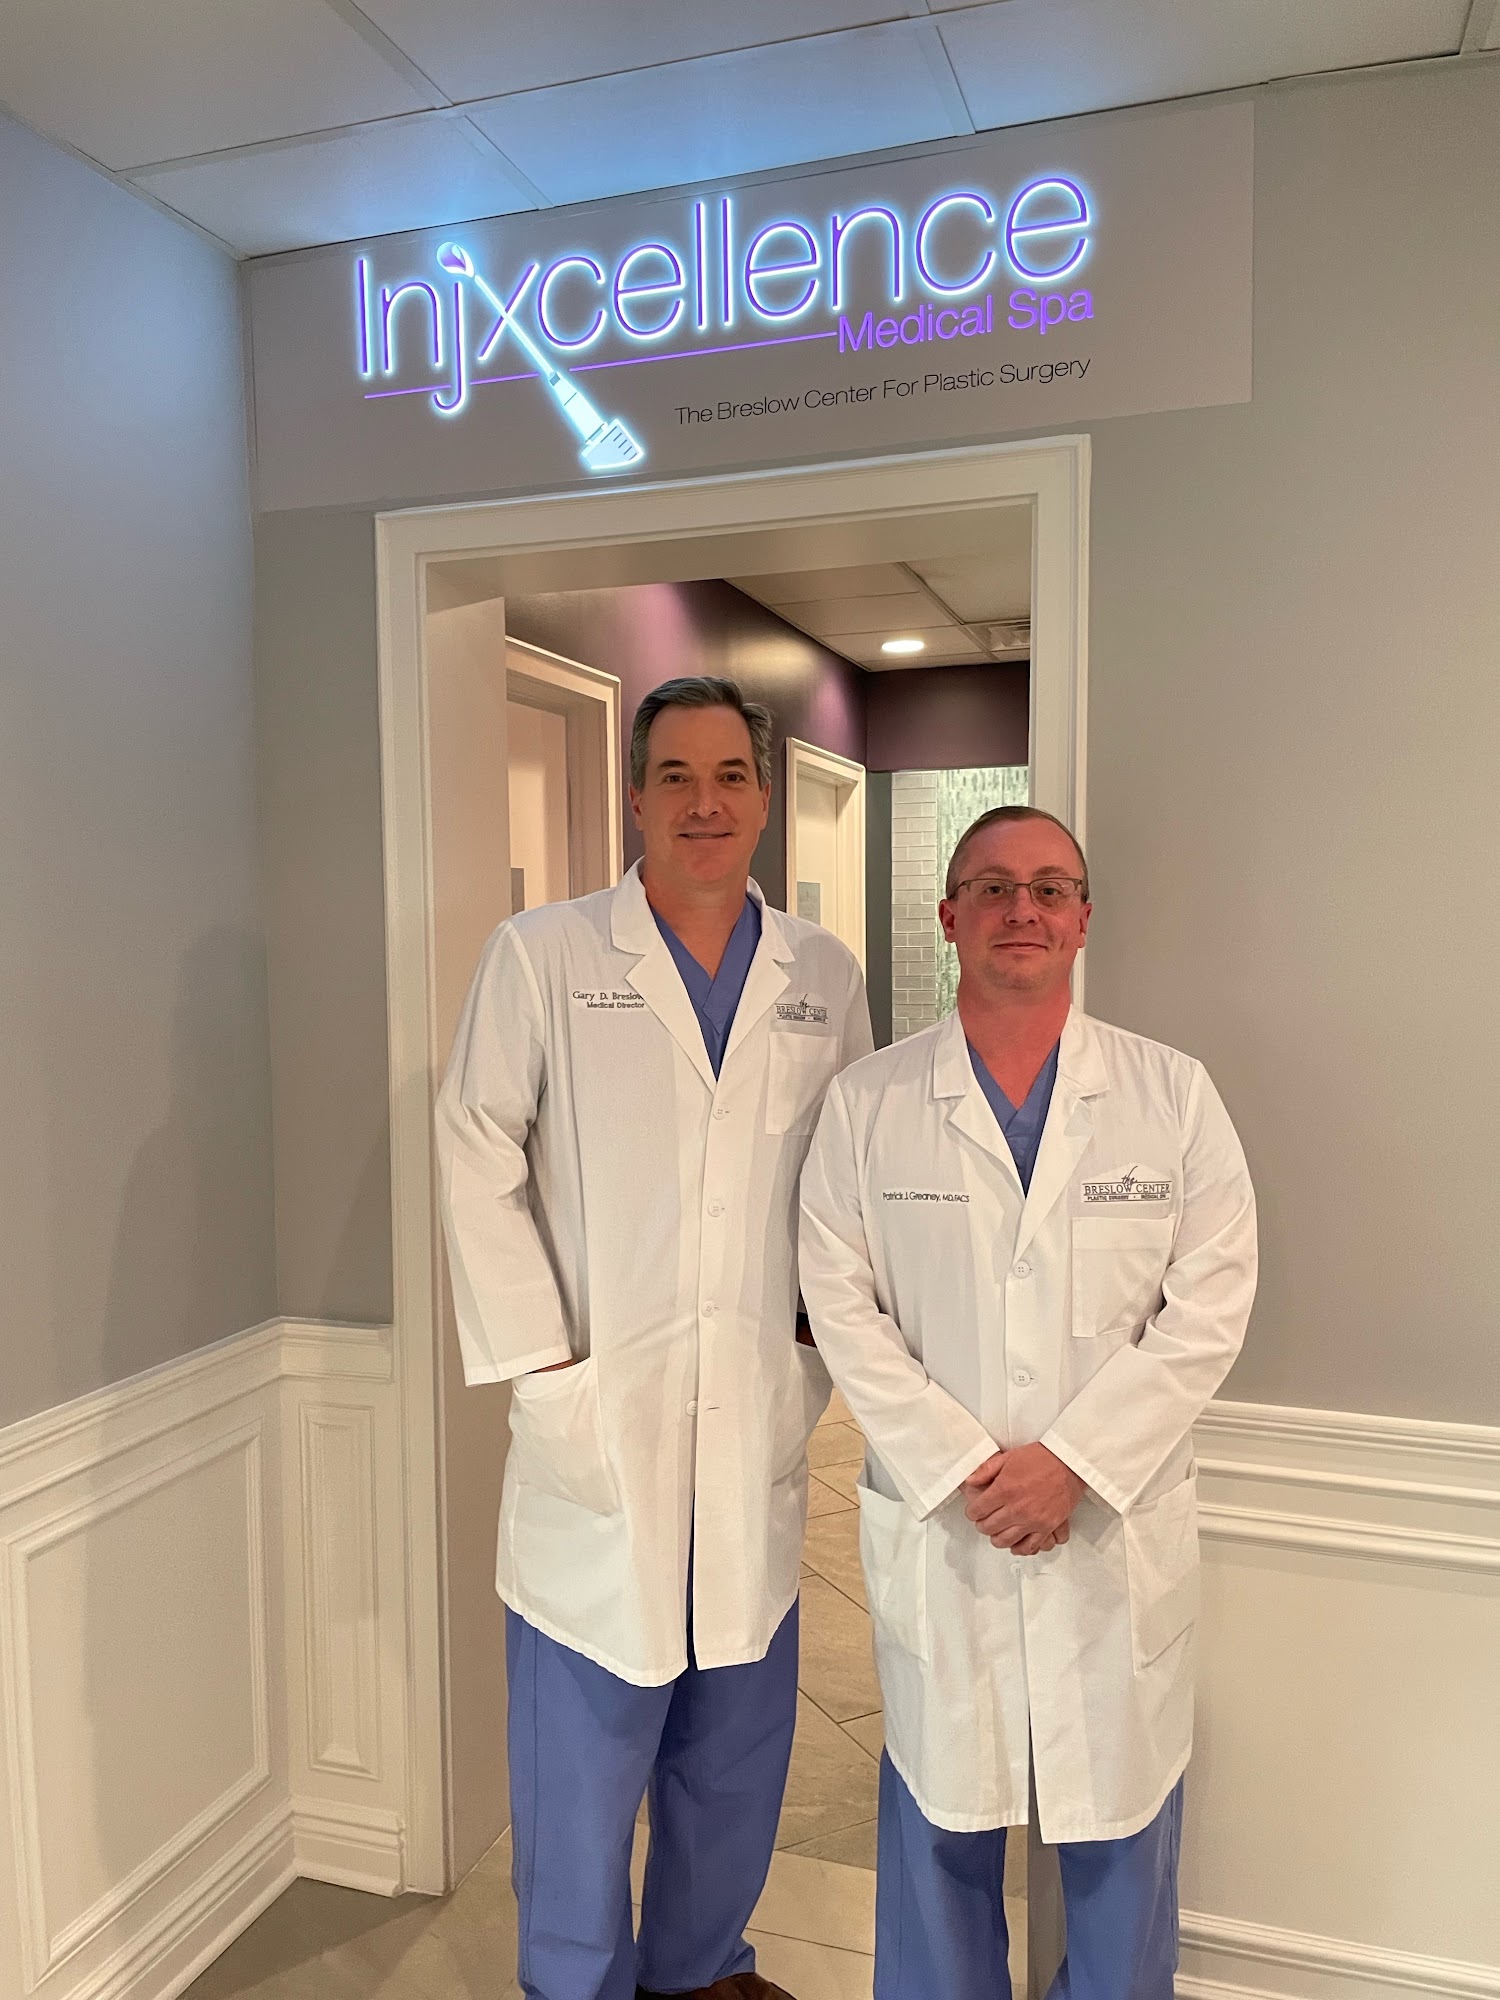 Injxcellence Medical Spa - Wyckoff Cosmetic Injectables and Lip Fillers 327 Franklin Ave Suite #6, Wyckoff New Jersey 07481